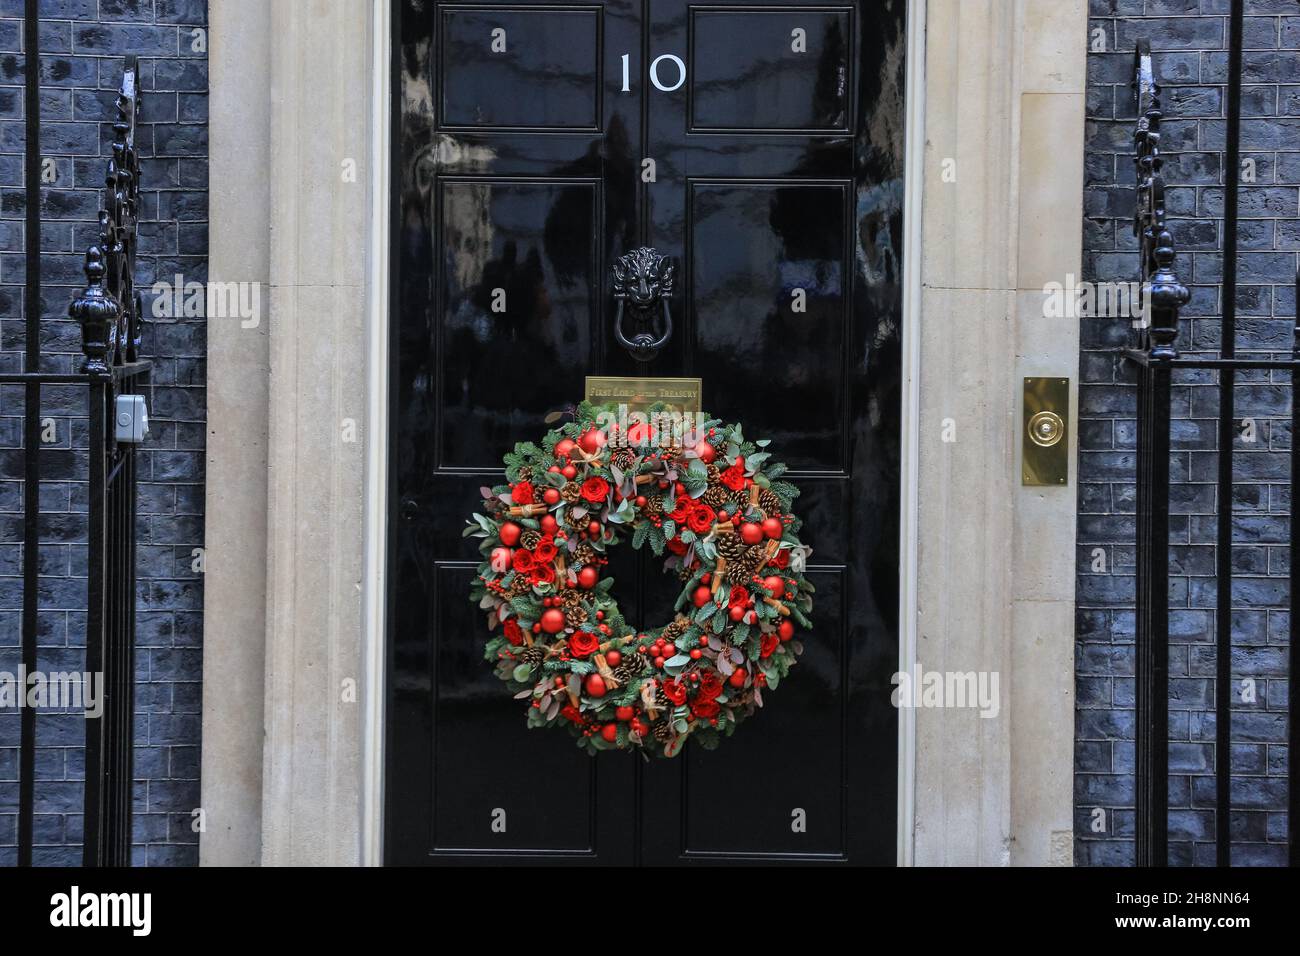 Westminster, London, UK. 01st Dec, 2021. The No 10 door with seasonal decorations, Christmas wreath and festive baubles outside. Credit: Imageplotter/Alamy Live News Stock Photo